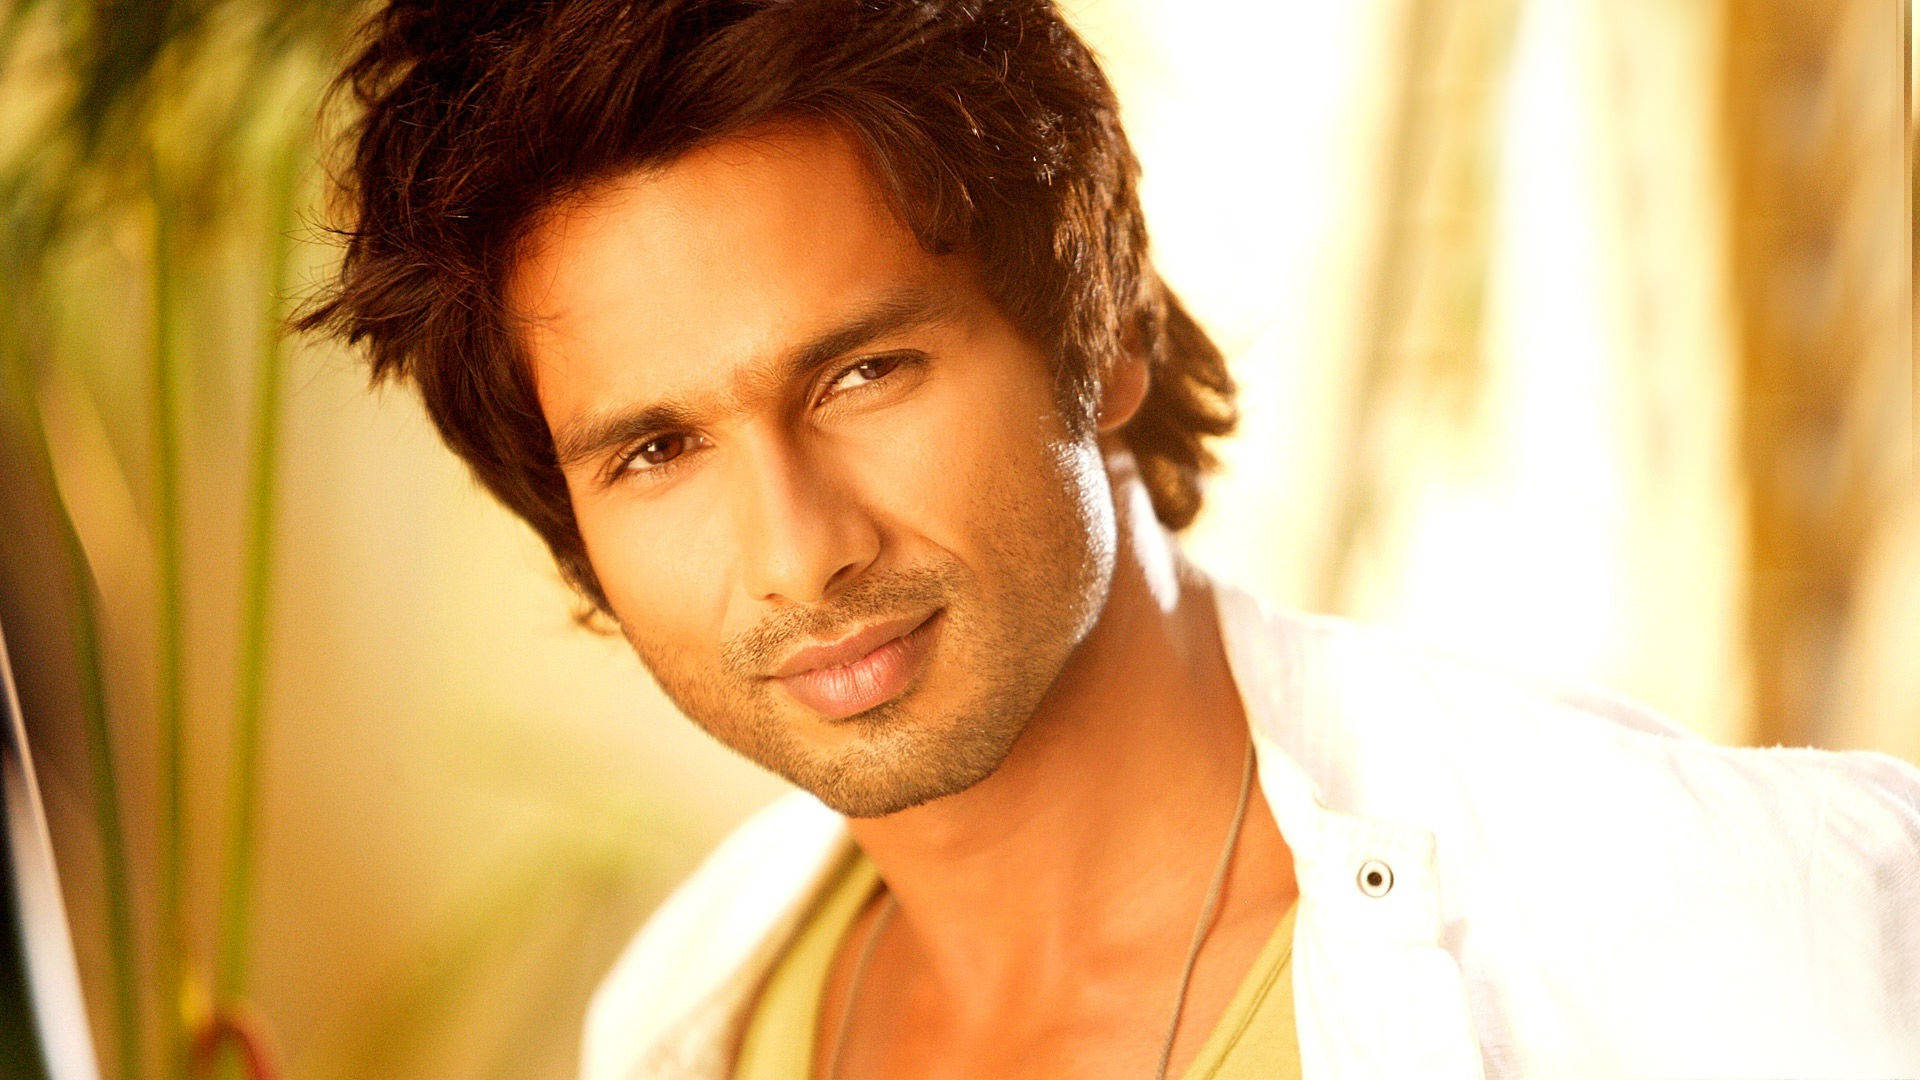 Free Shahid Kapoor Wallpaper Downloads, [100+] Shahid Kapoor Wallpapers for  FREE 